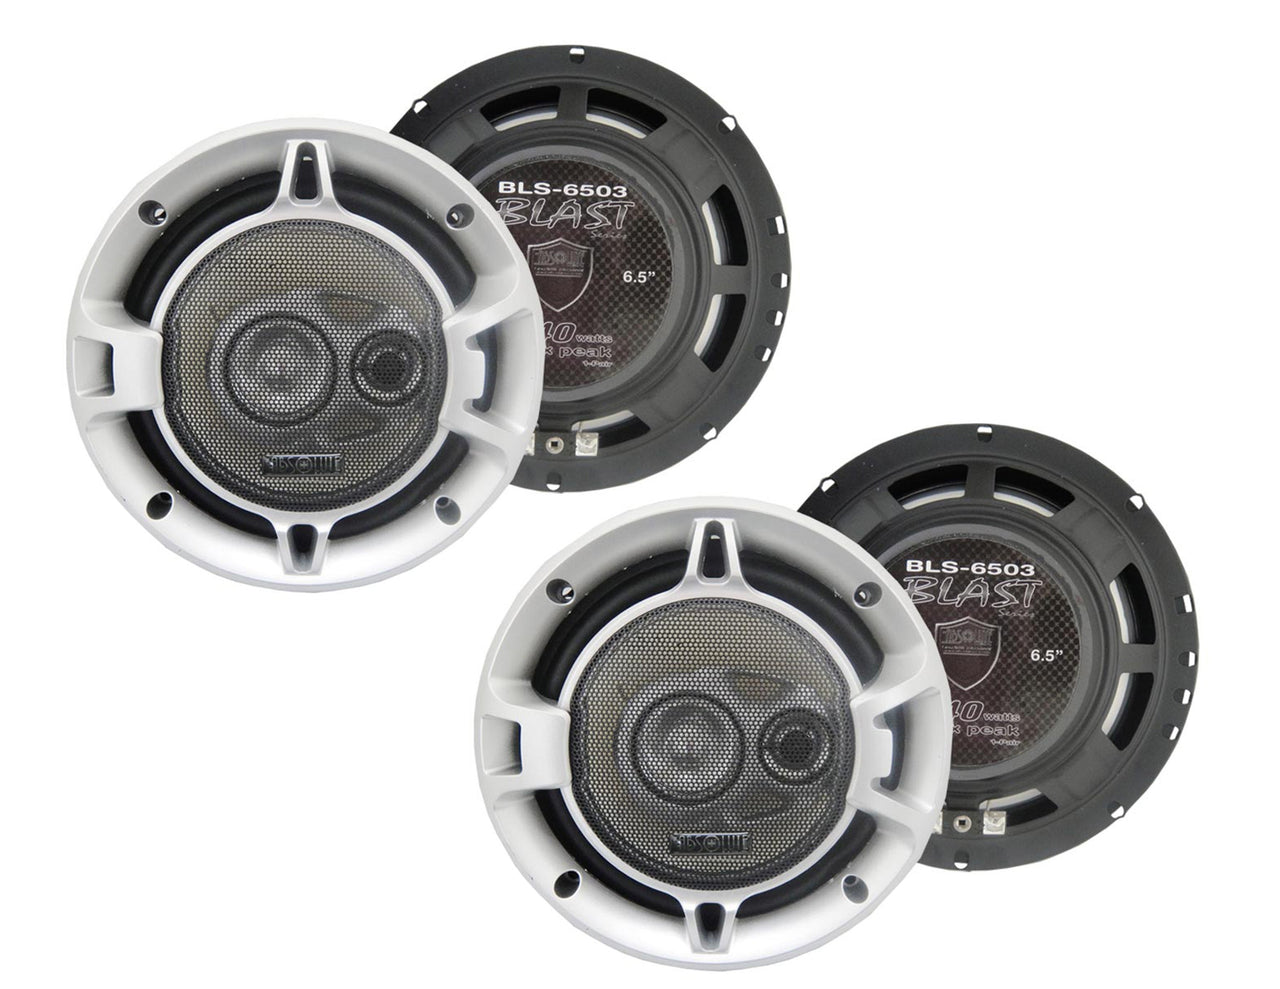 Absolute USA 2 X BLS-6503 Blast Series 6.5 Inches 3 Way Car Speakers 640 Watts Max Power